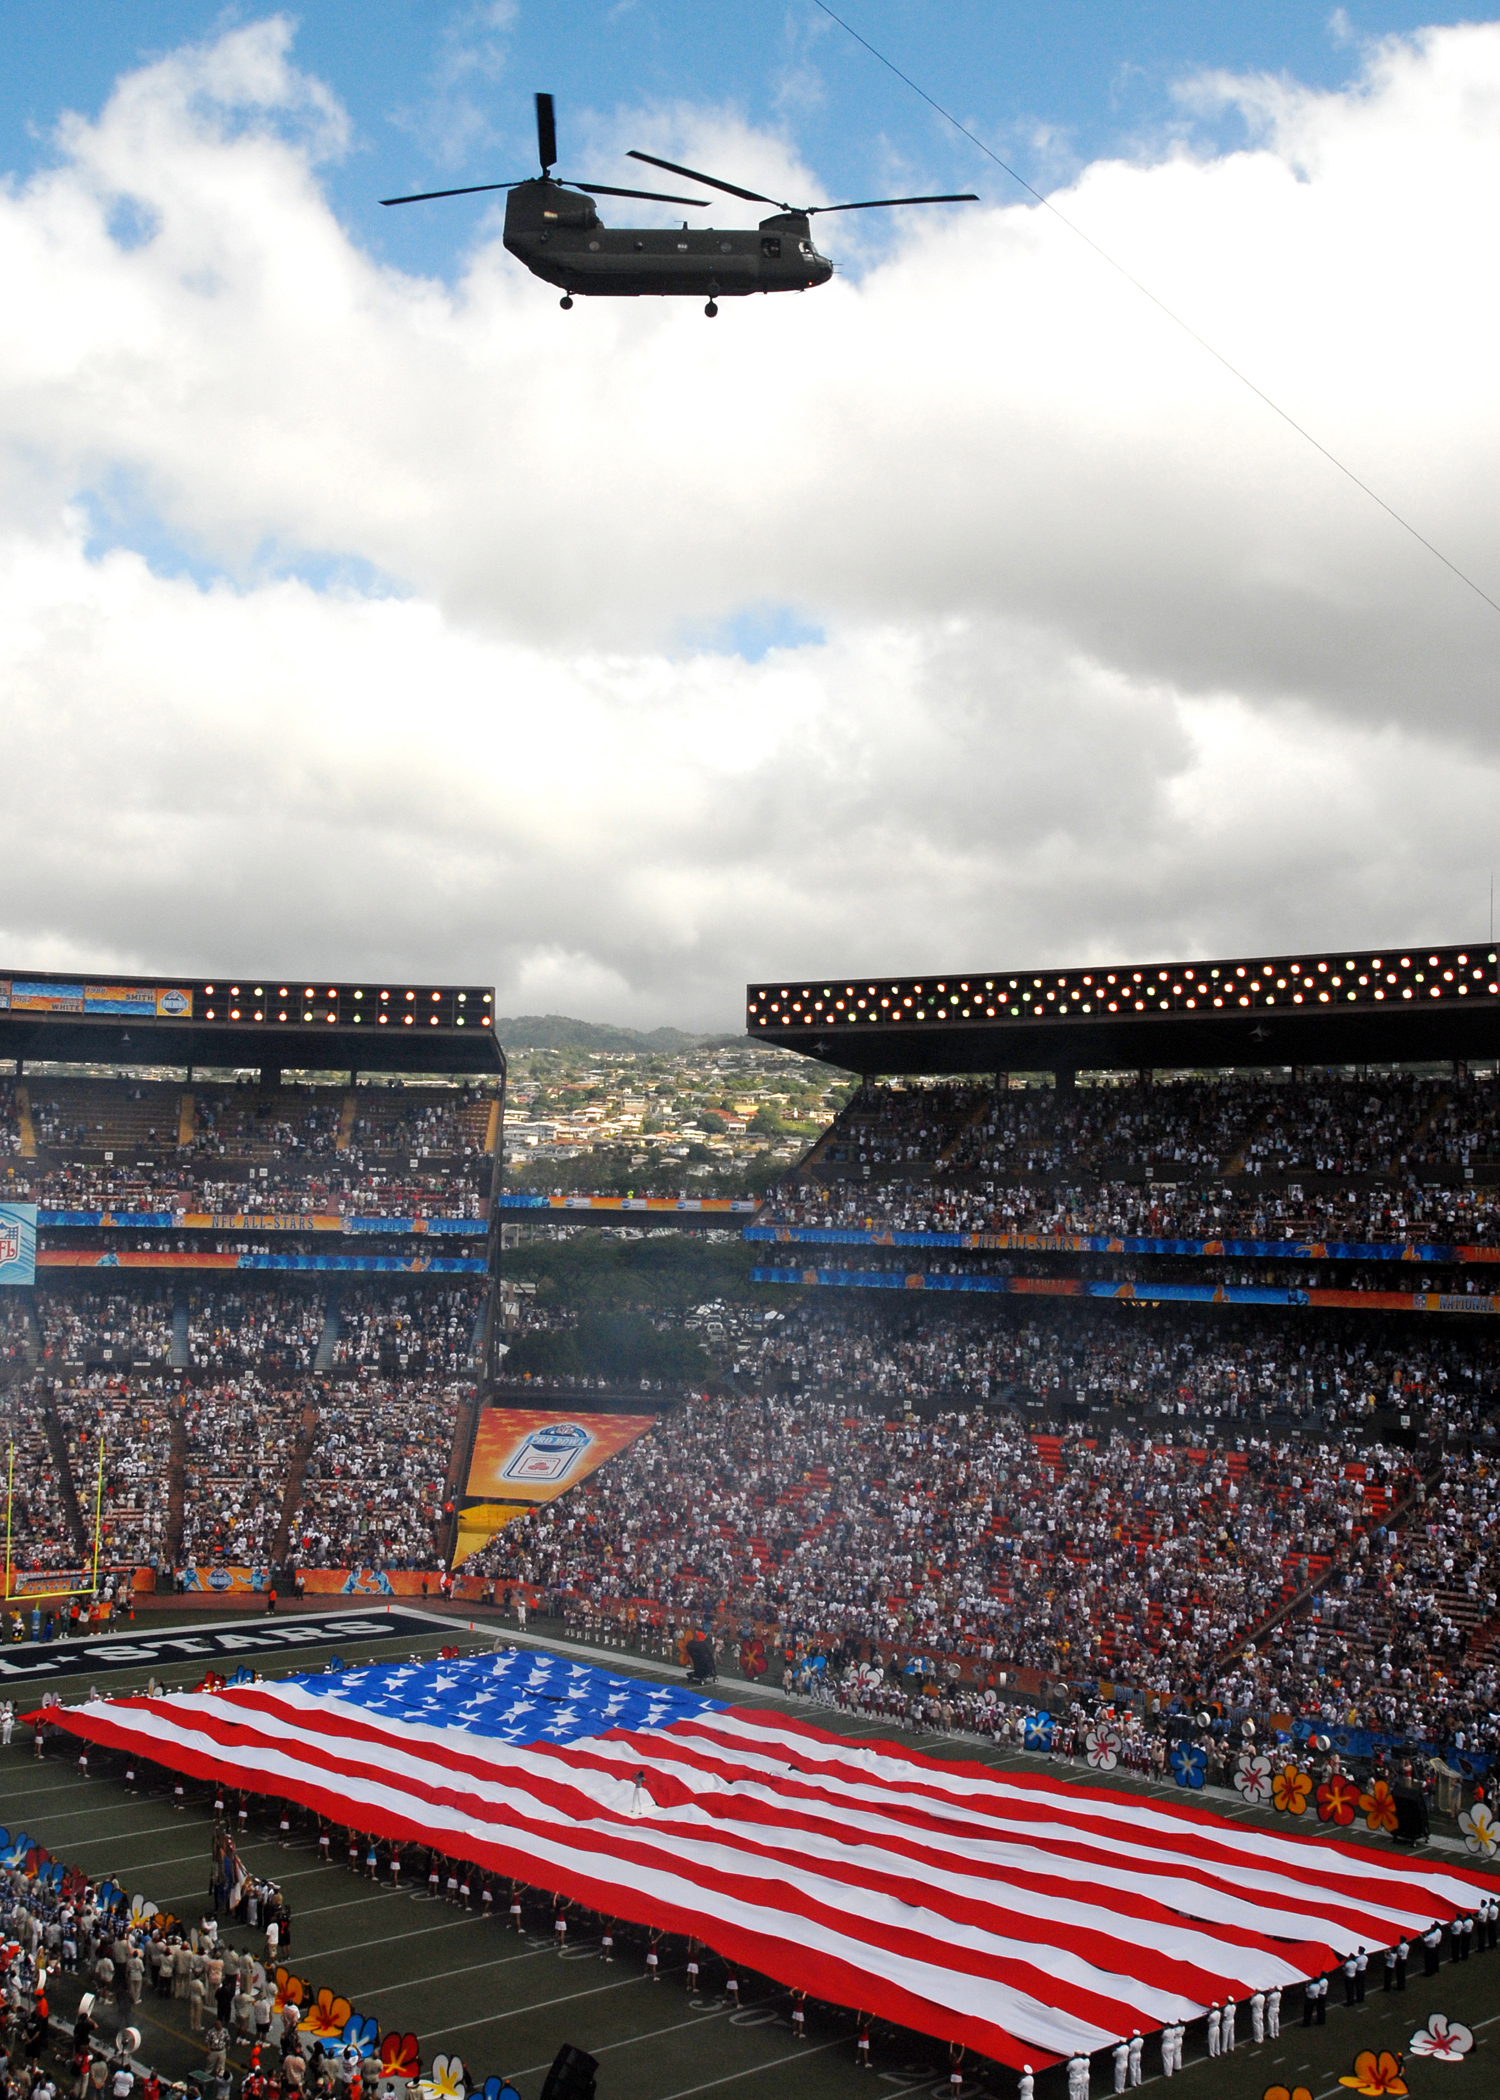 US Navy 080210-N-5476H-054 A Hawaii Army National Guard CH-47 Chinook helicopter flies above Aloha Stadium during the national anthem during pre-game ceremonies for the 2008 NFL Pro Bowl